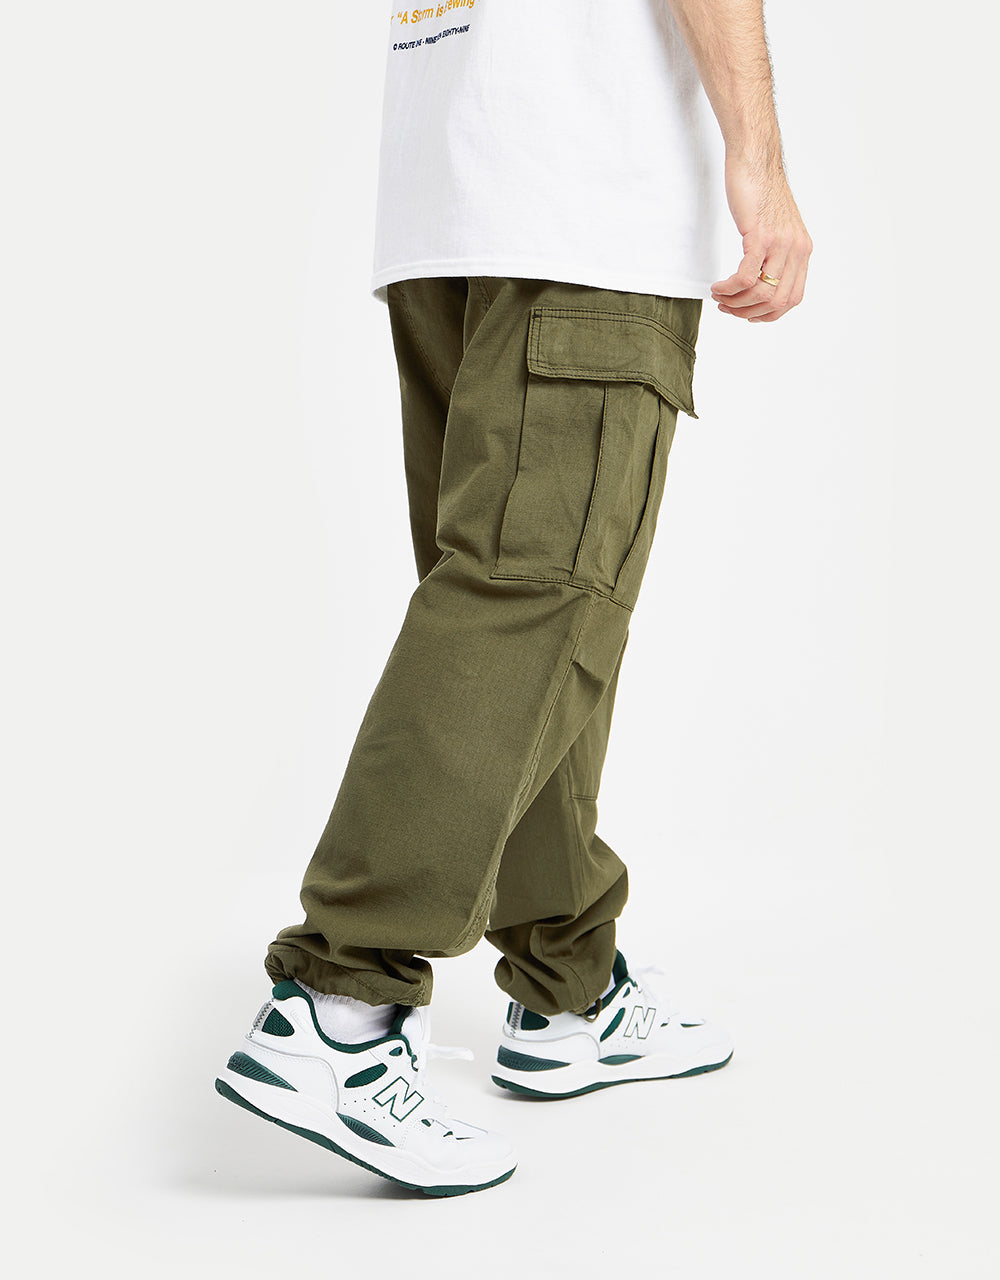 Olive Cargo Pants with White and Brown High Top Sneakers Casual Warm  Weather Outfits In Their 20s (10 ideas & outfits) | Lookastic